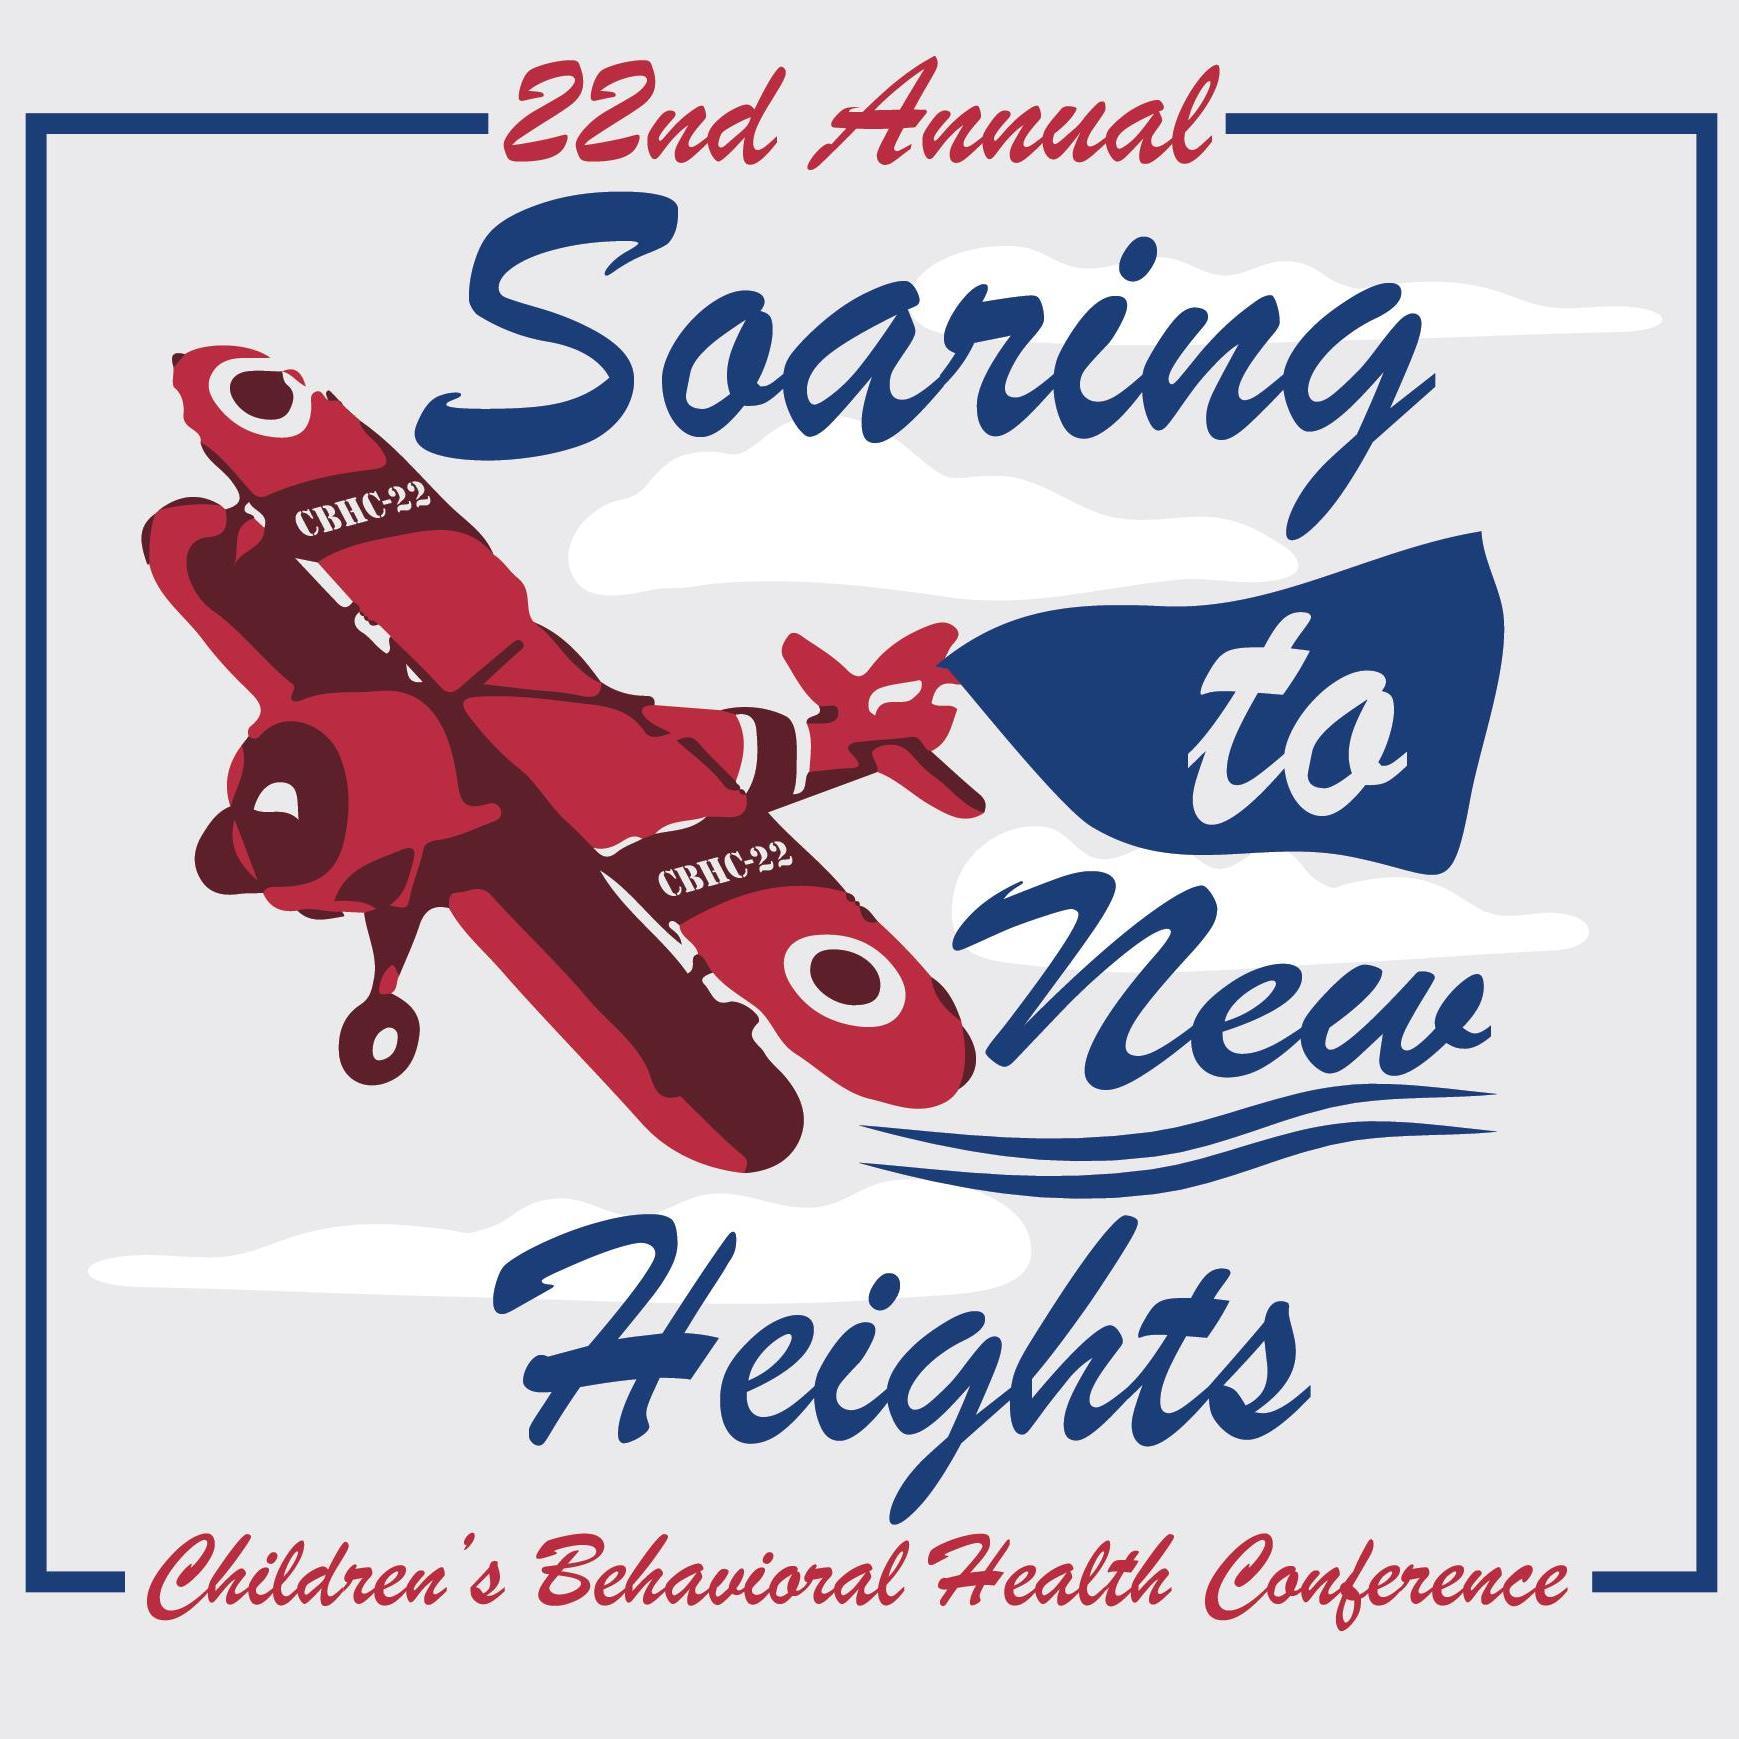 Conference attendees will strengthen their knowledge of behavioral health & wellness and expand the possibilities for infants, children, youth and young adults.